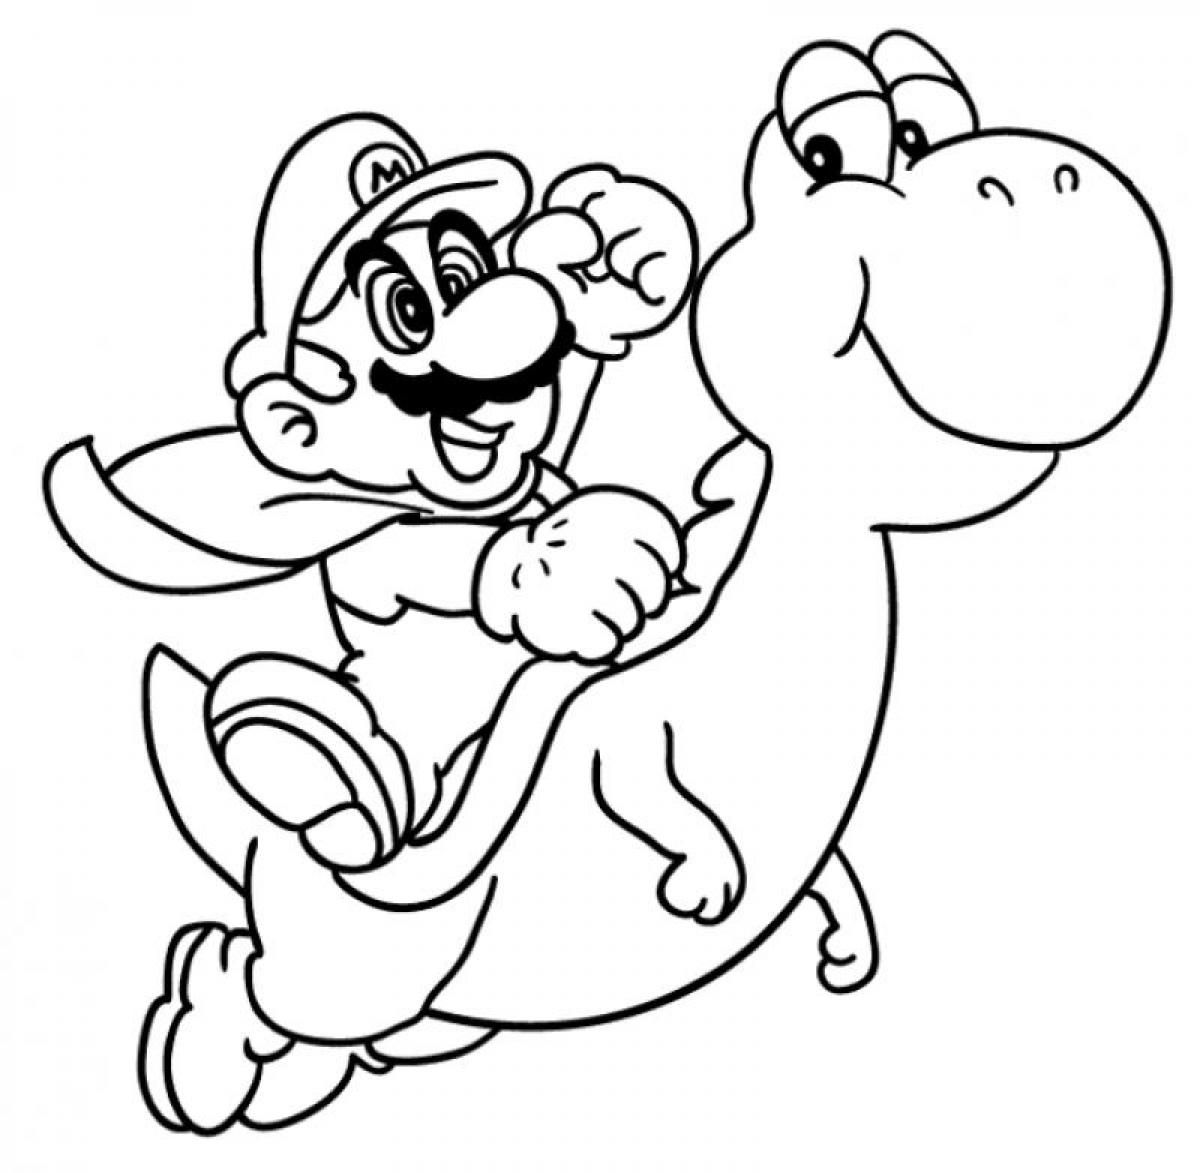 All Mario Characters Coloring Pages Yoshi   Coloring Pages For All ...